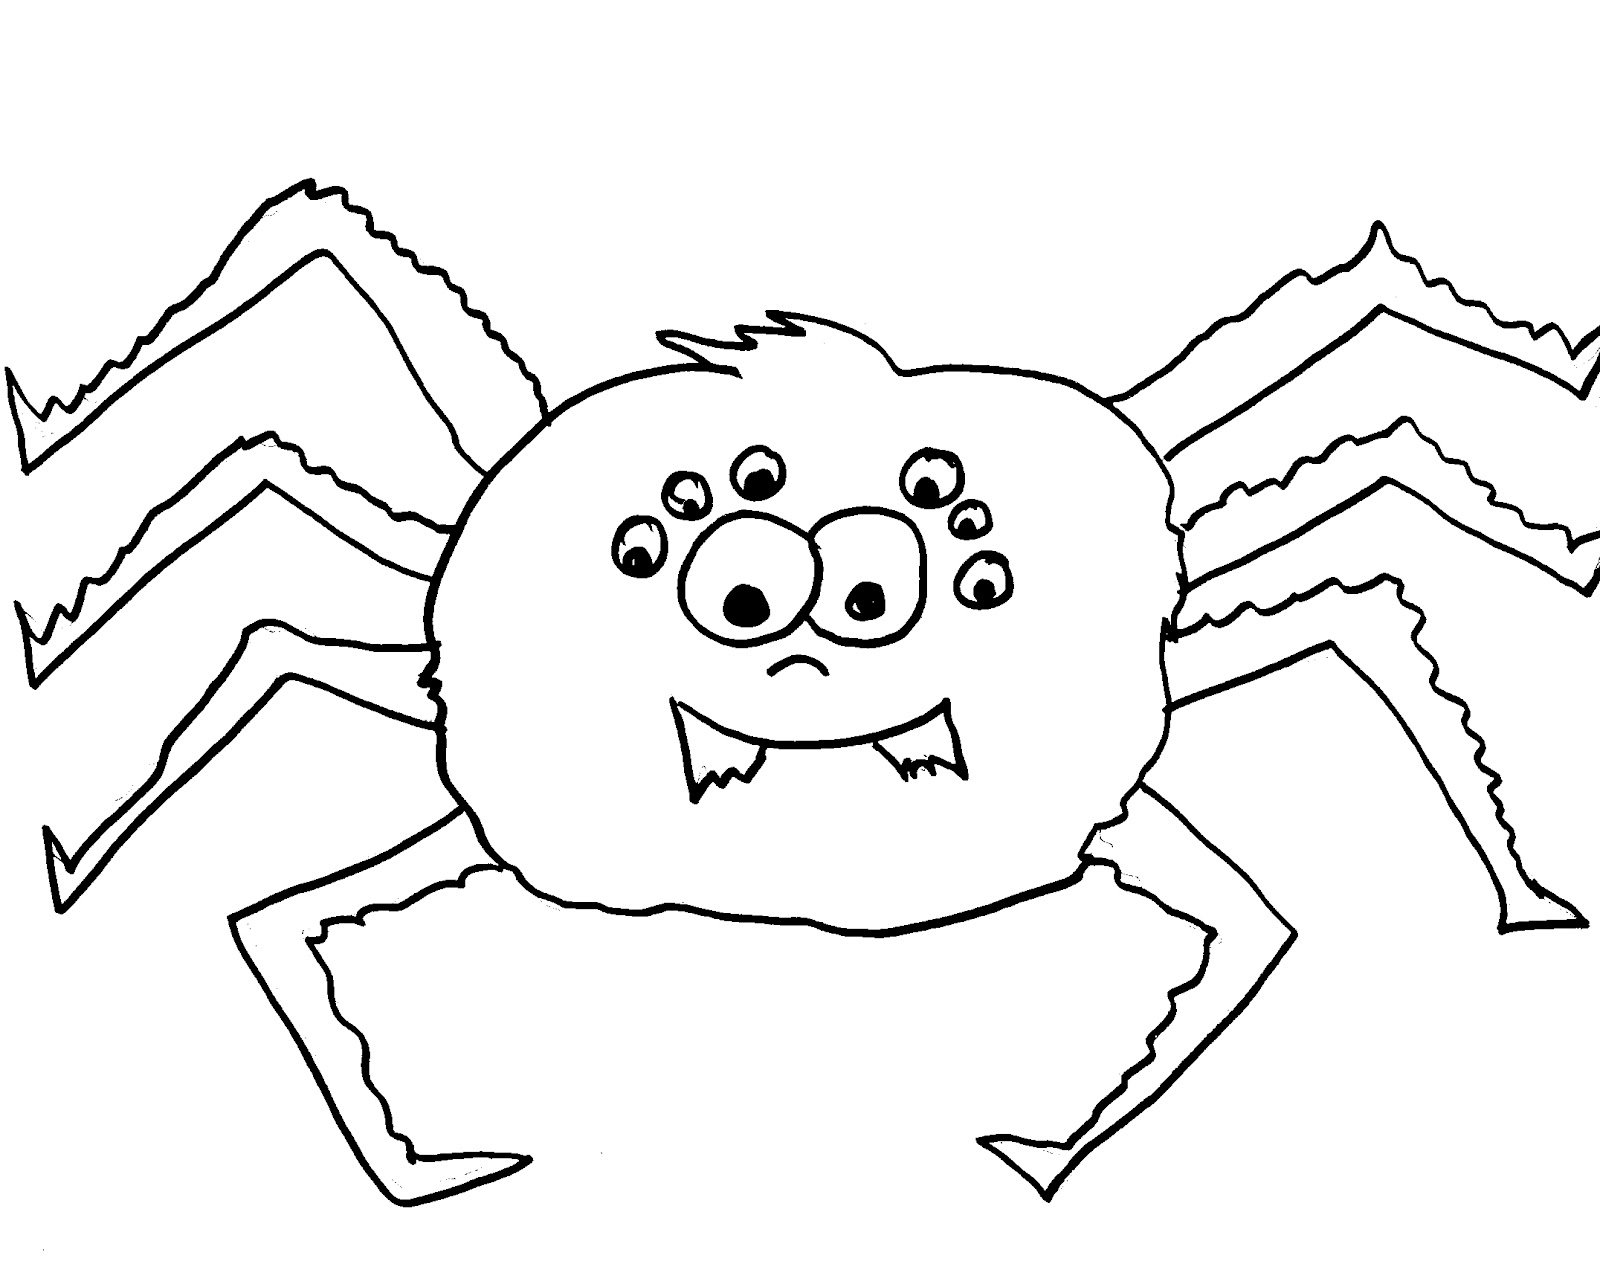 Coloring Pages of Spider – Animal Place